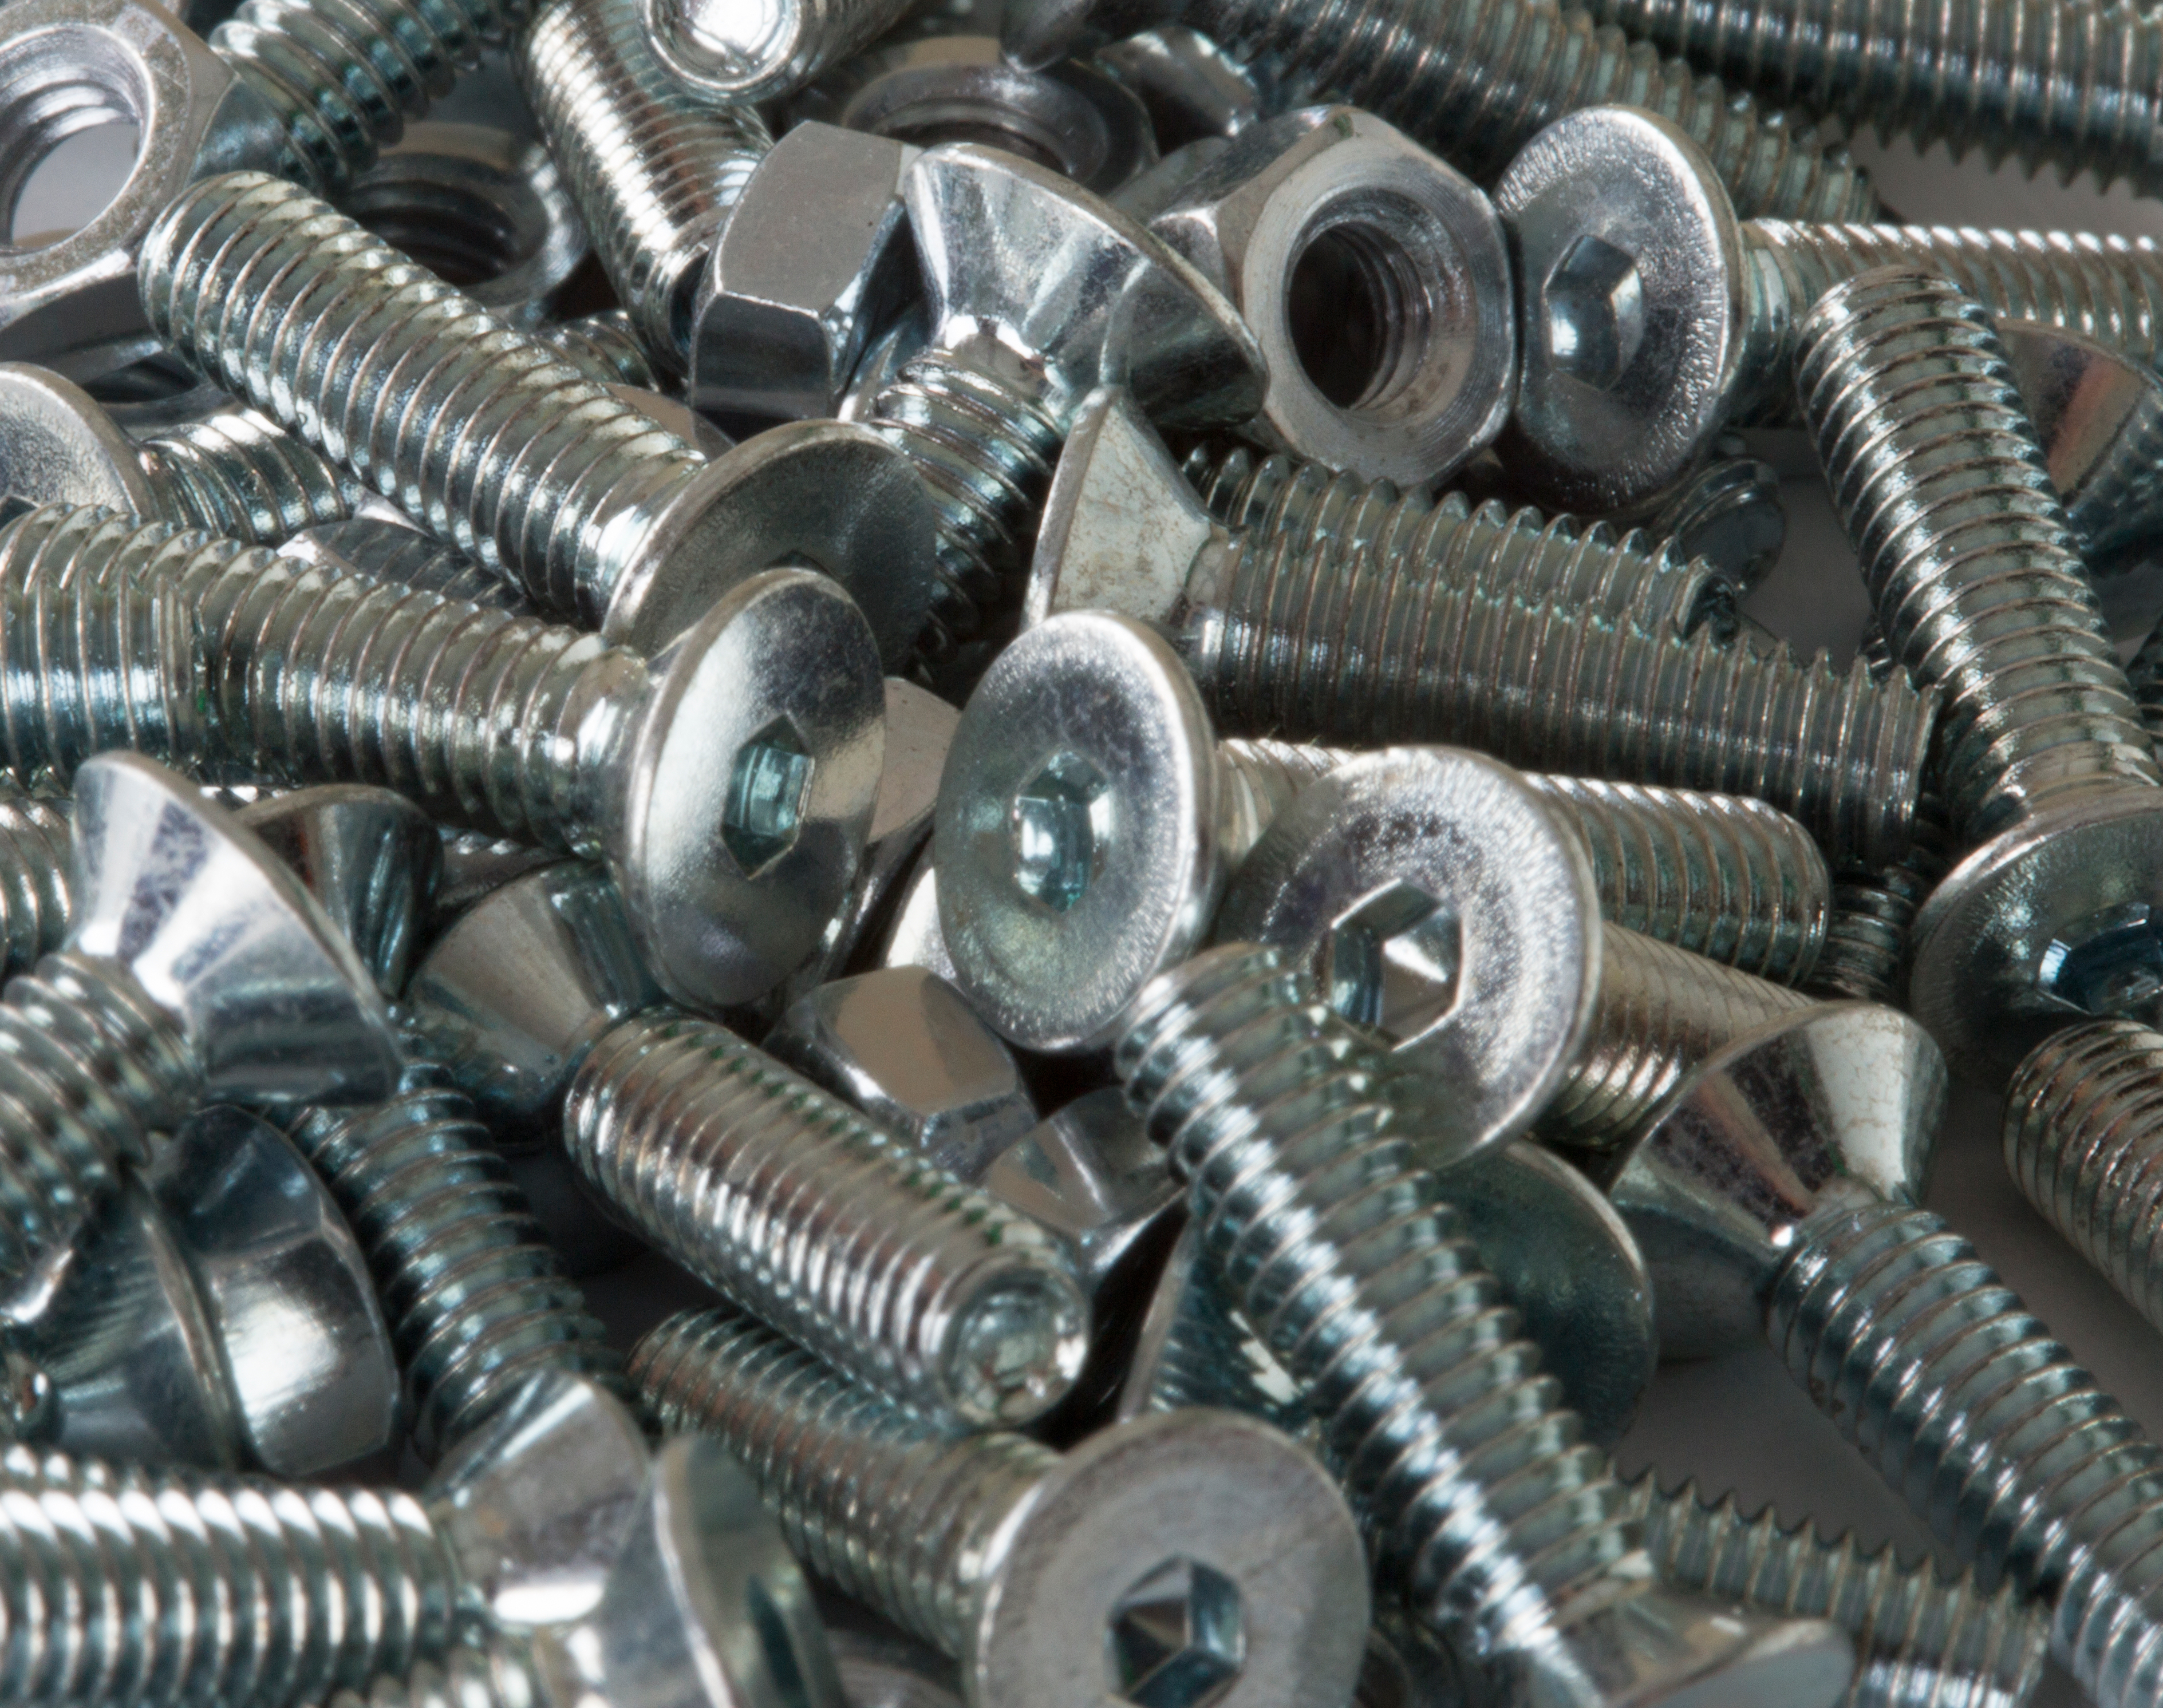 Set 50x M4 screws/nuts for mounting Mains outlet.